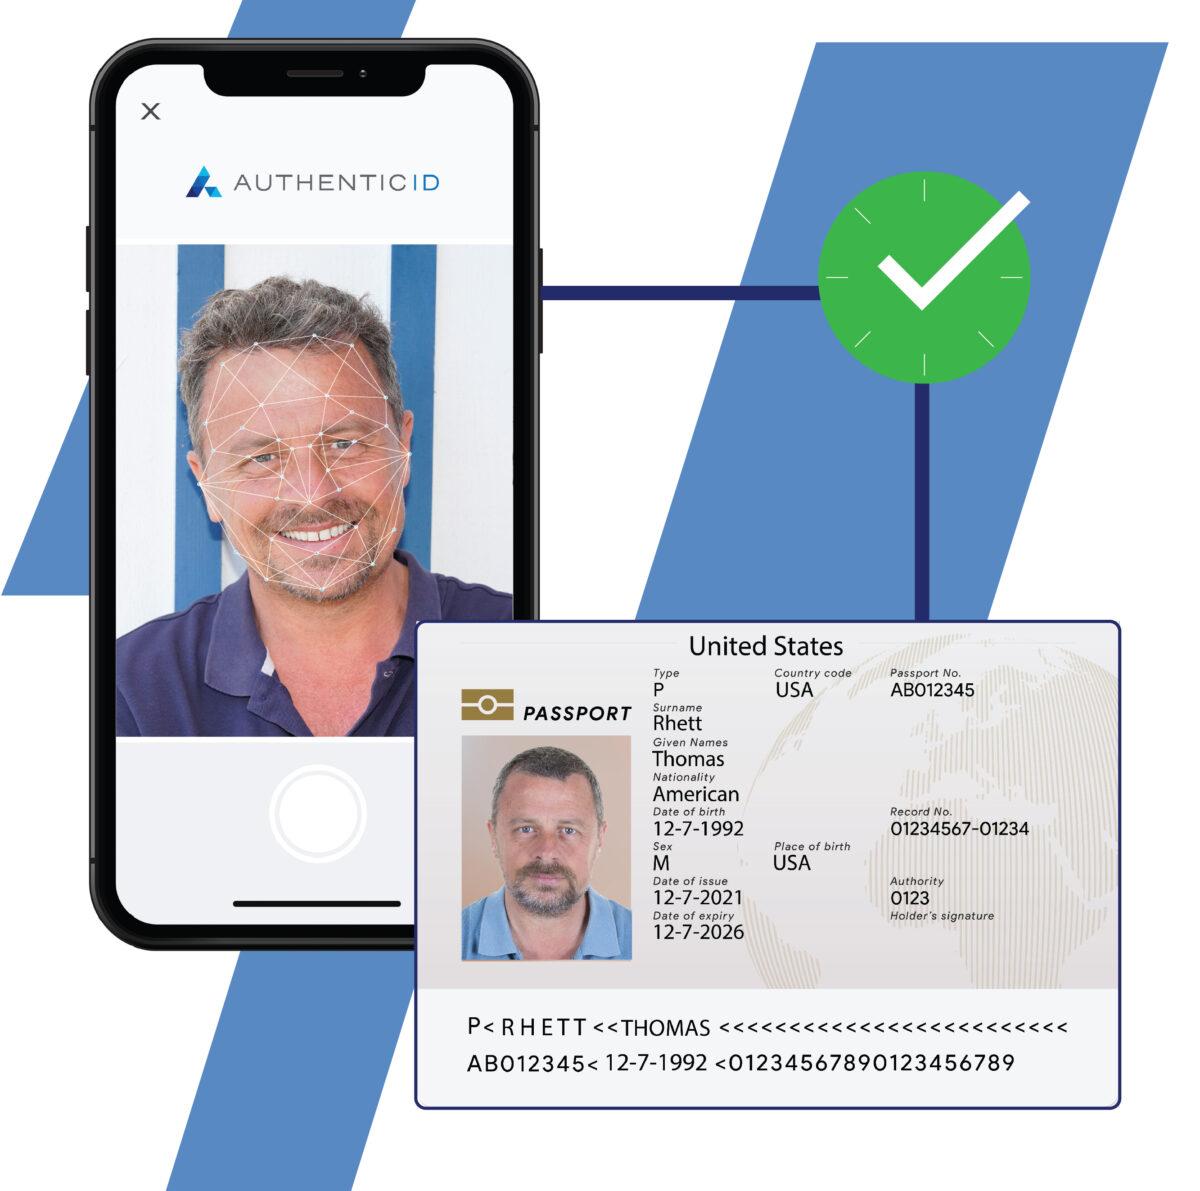 AuthenticID’s Facial Biometric technology provides a lightning-quick, simple way to use biometric authentication to verify an individual by matching a person’s selfie to the photo on a government-issued ID.